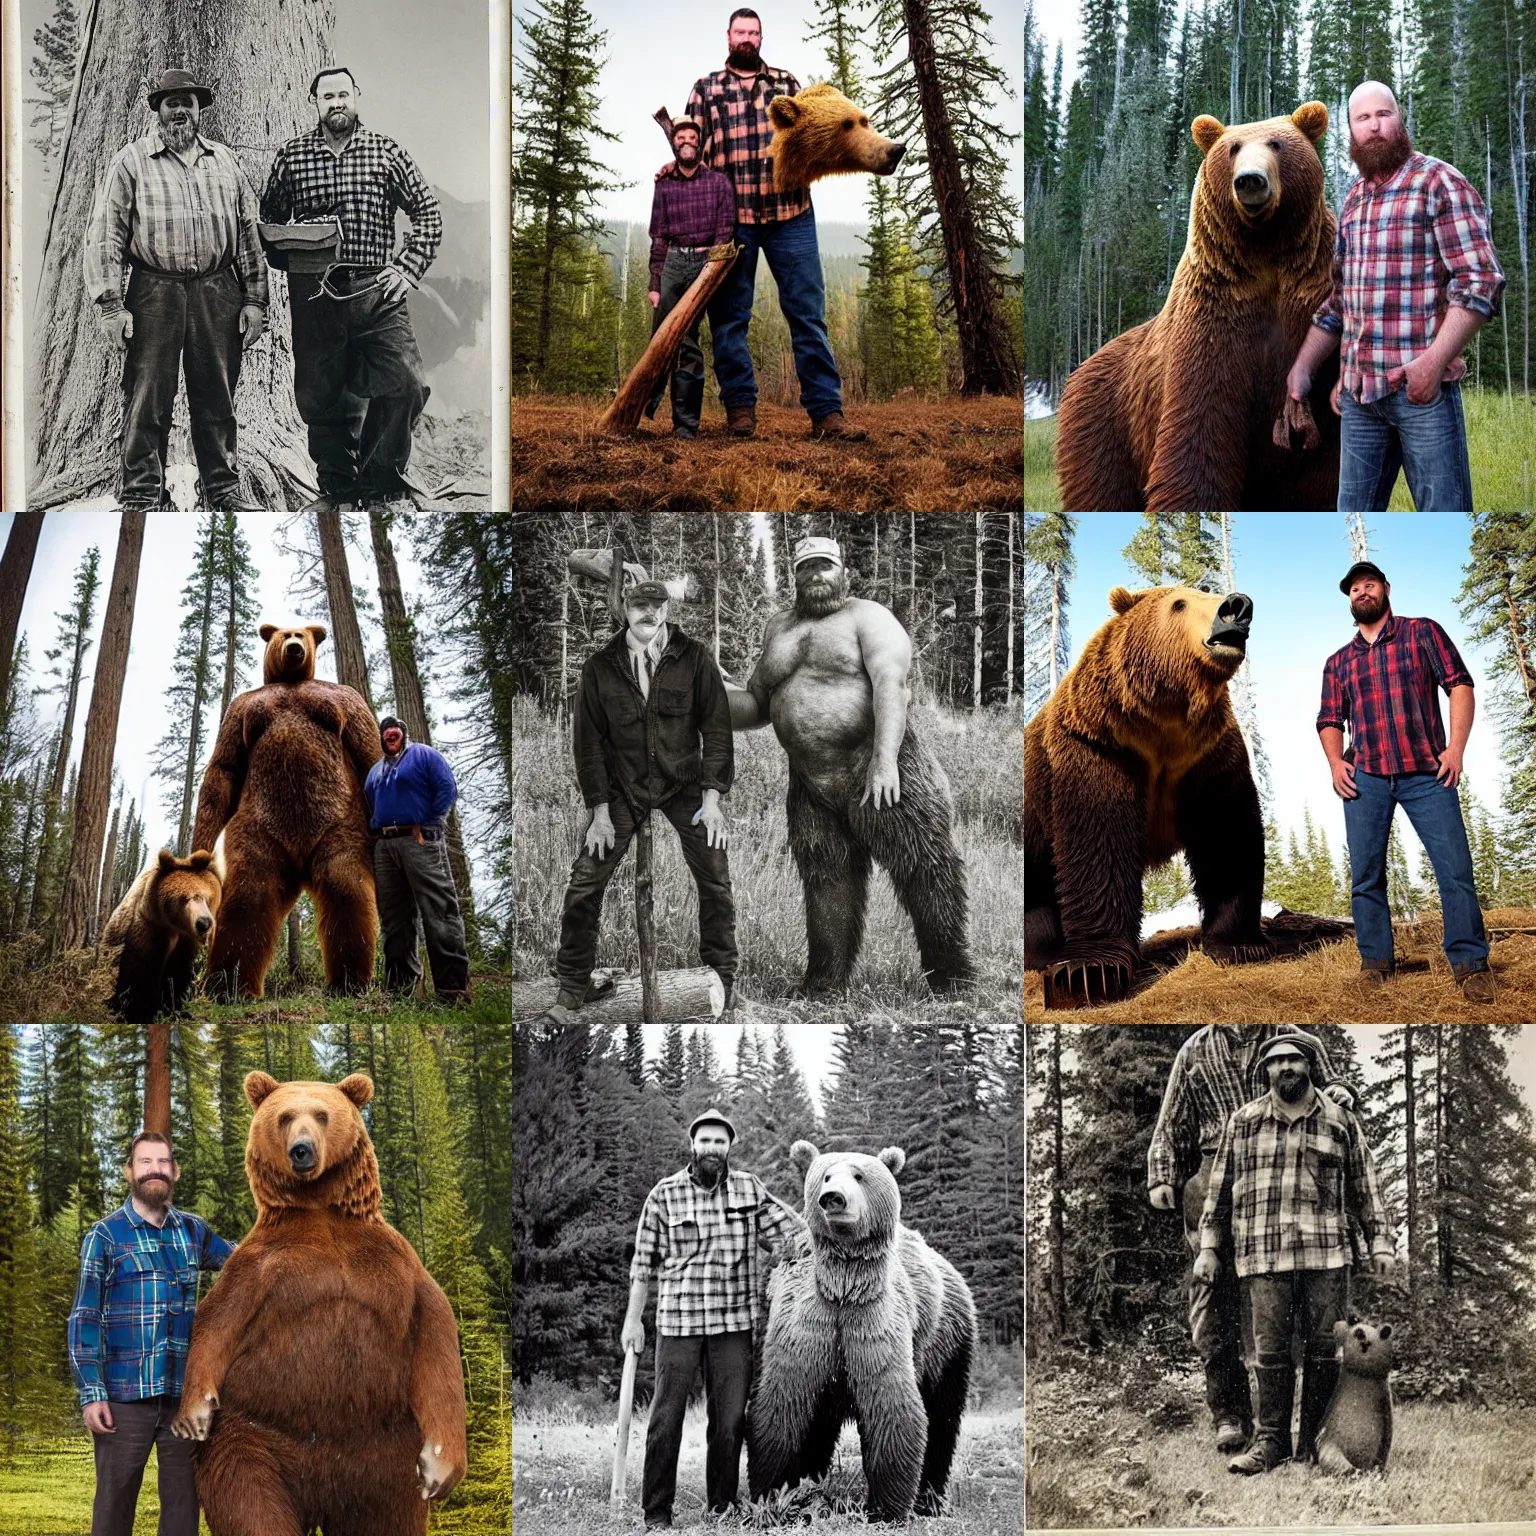 Prompt: portrait photo of a lumberjack man and his 2 0 feet tall giant grizzly bear